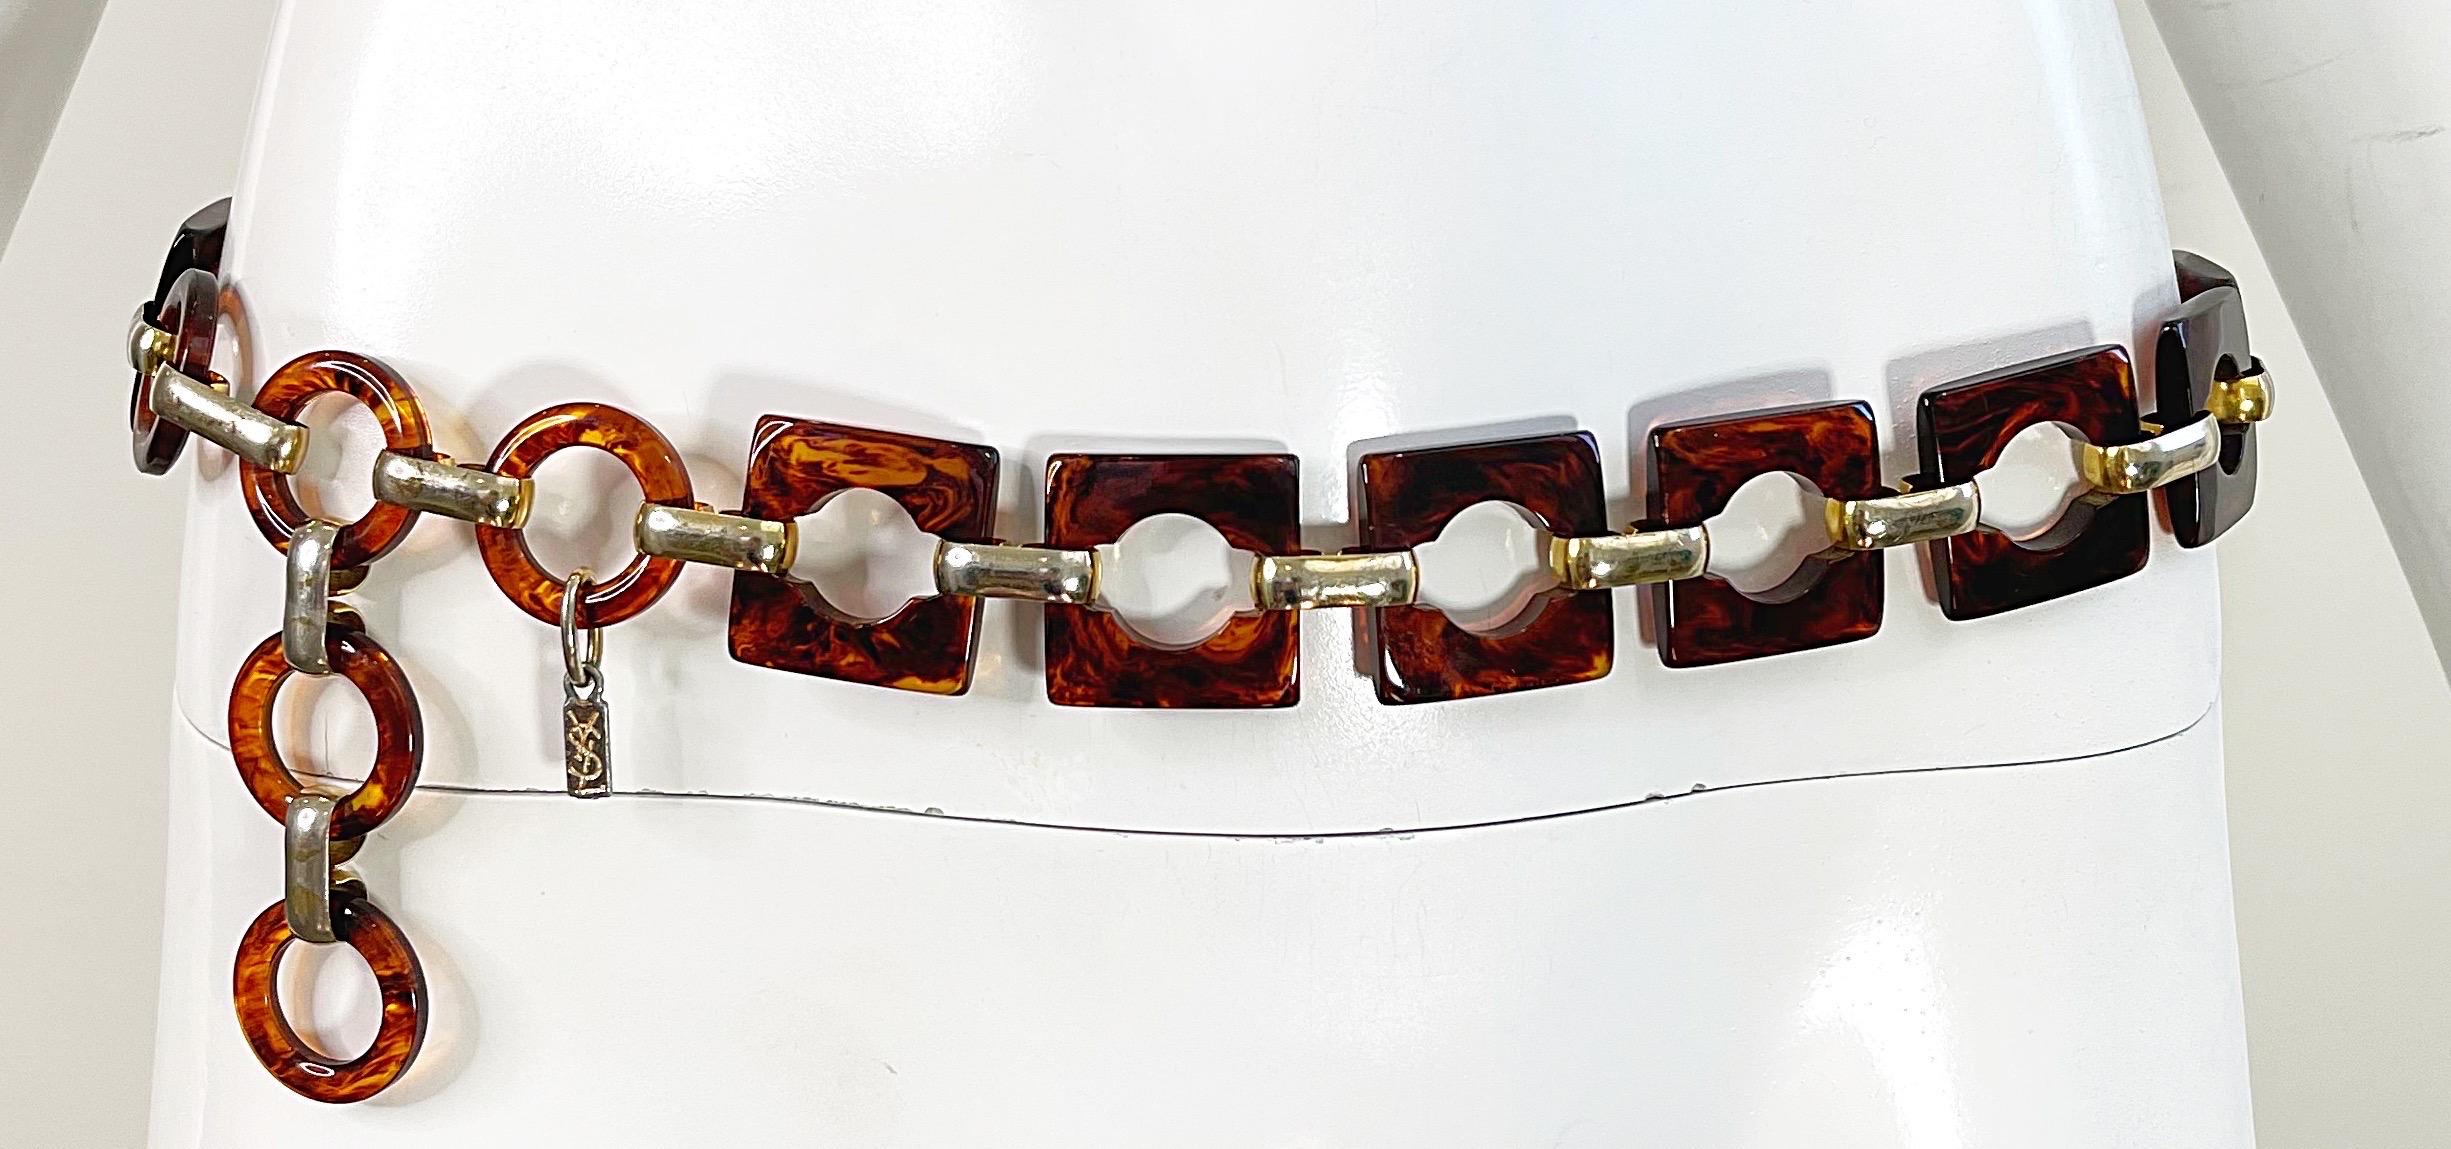 1970s Yves Saint Laurent YSL Tortoise Lucite Vintage Chain Link Belt or Necklace In Excellent Condition For Sale In San Diego, CA